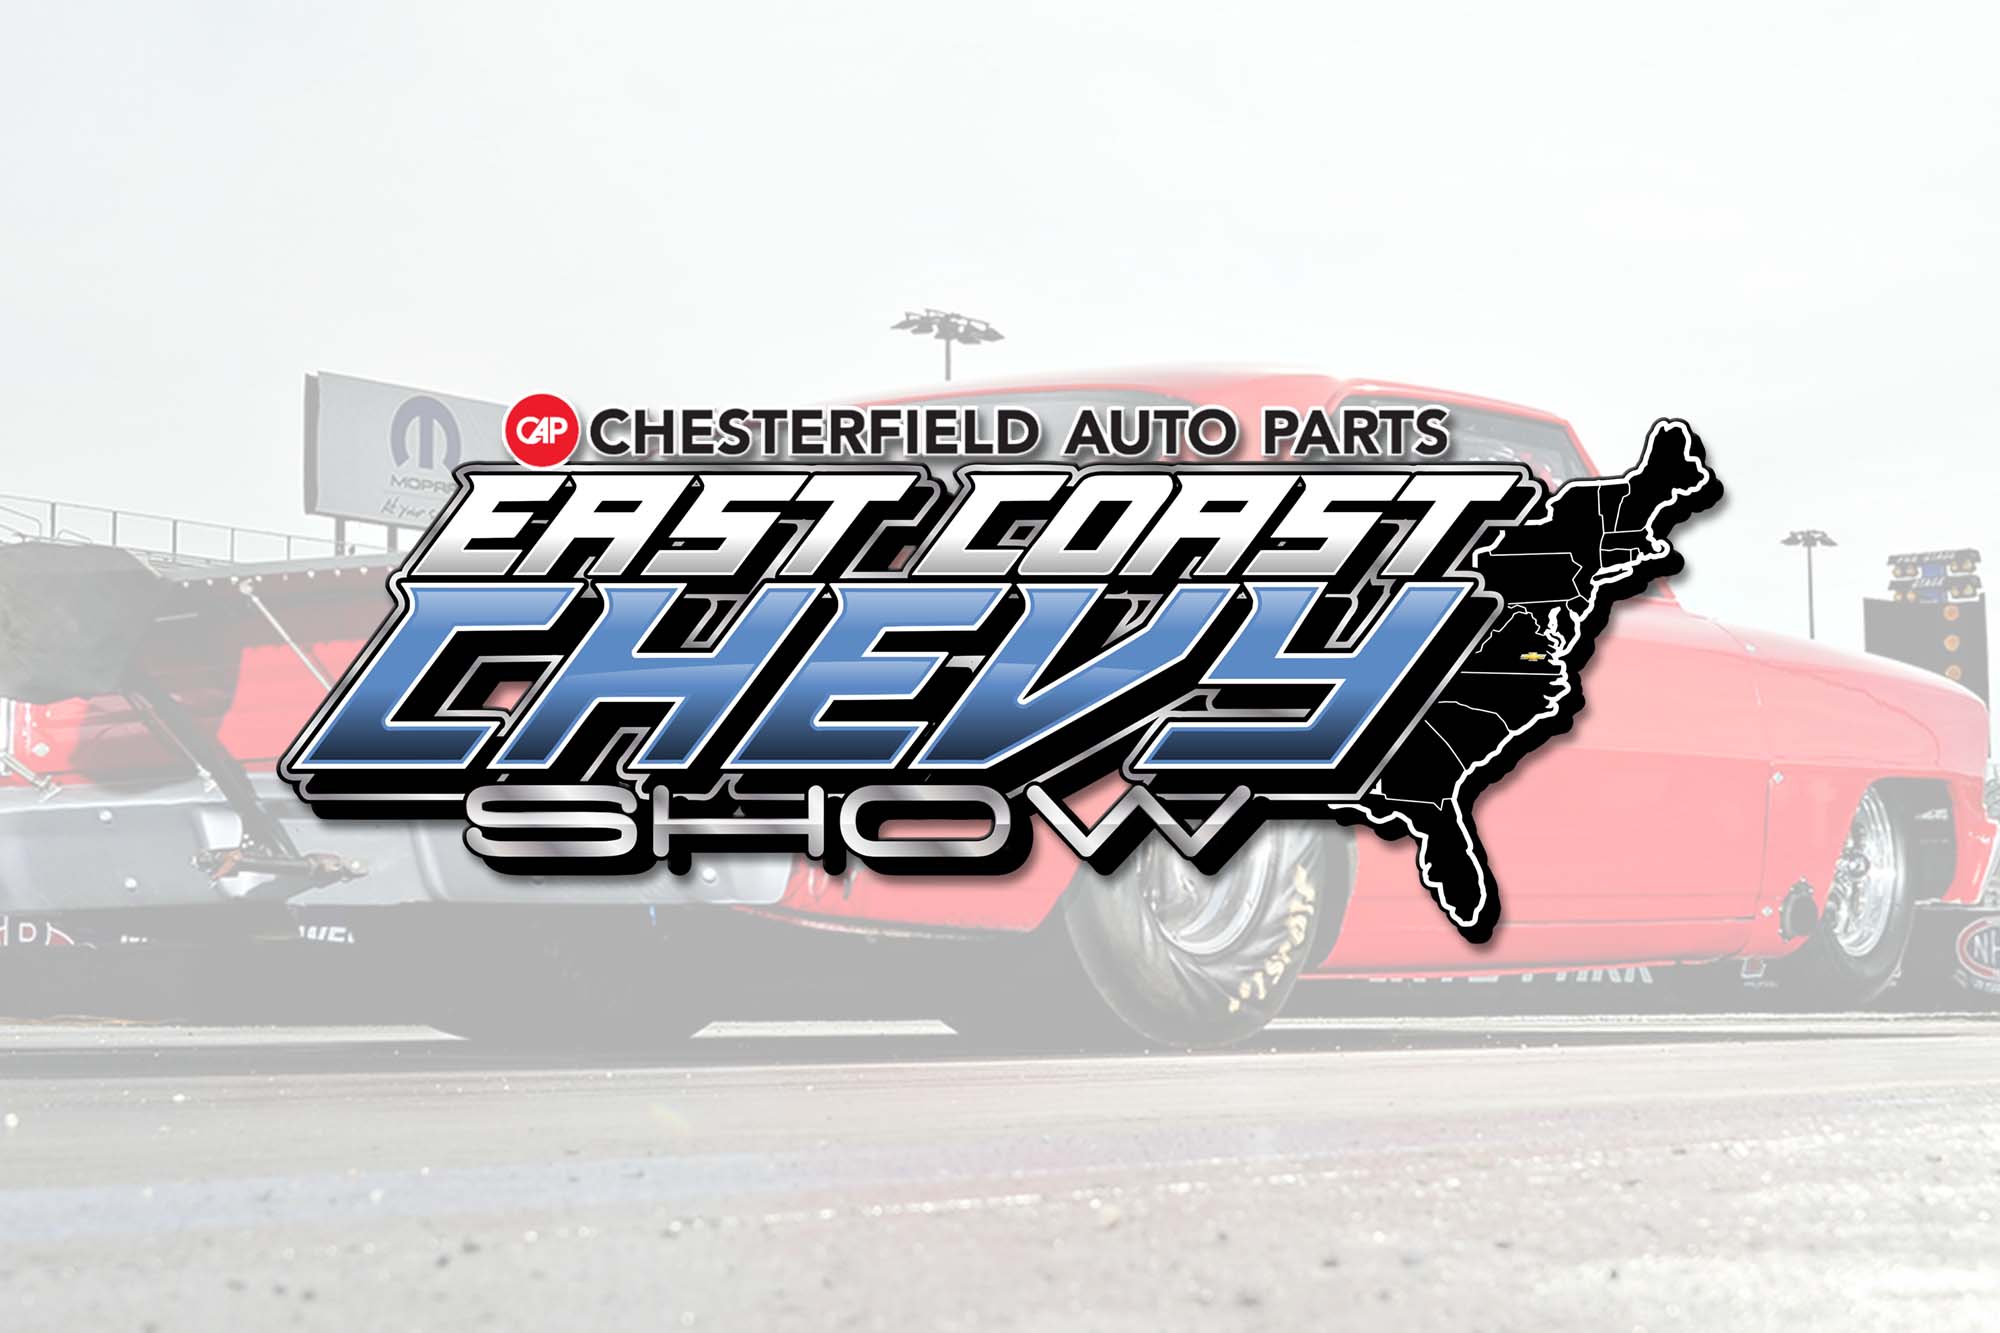 Jonathan Martin Doubles Up During Chesterfield Auto East Coast Chevy Show